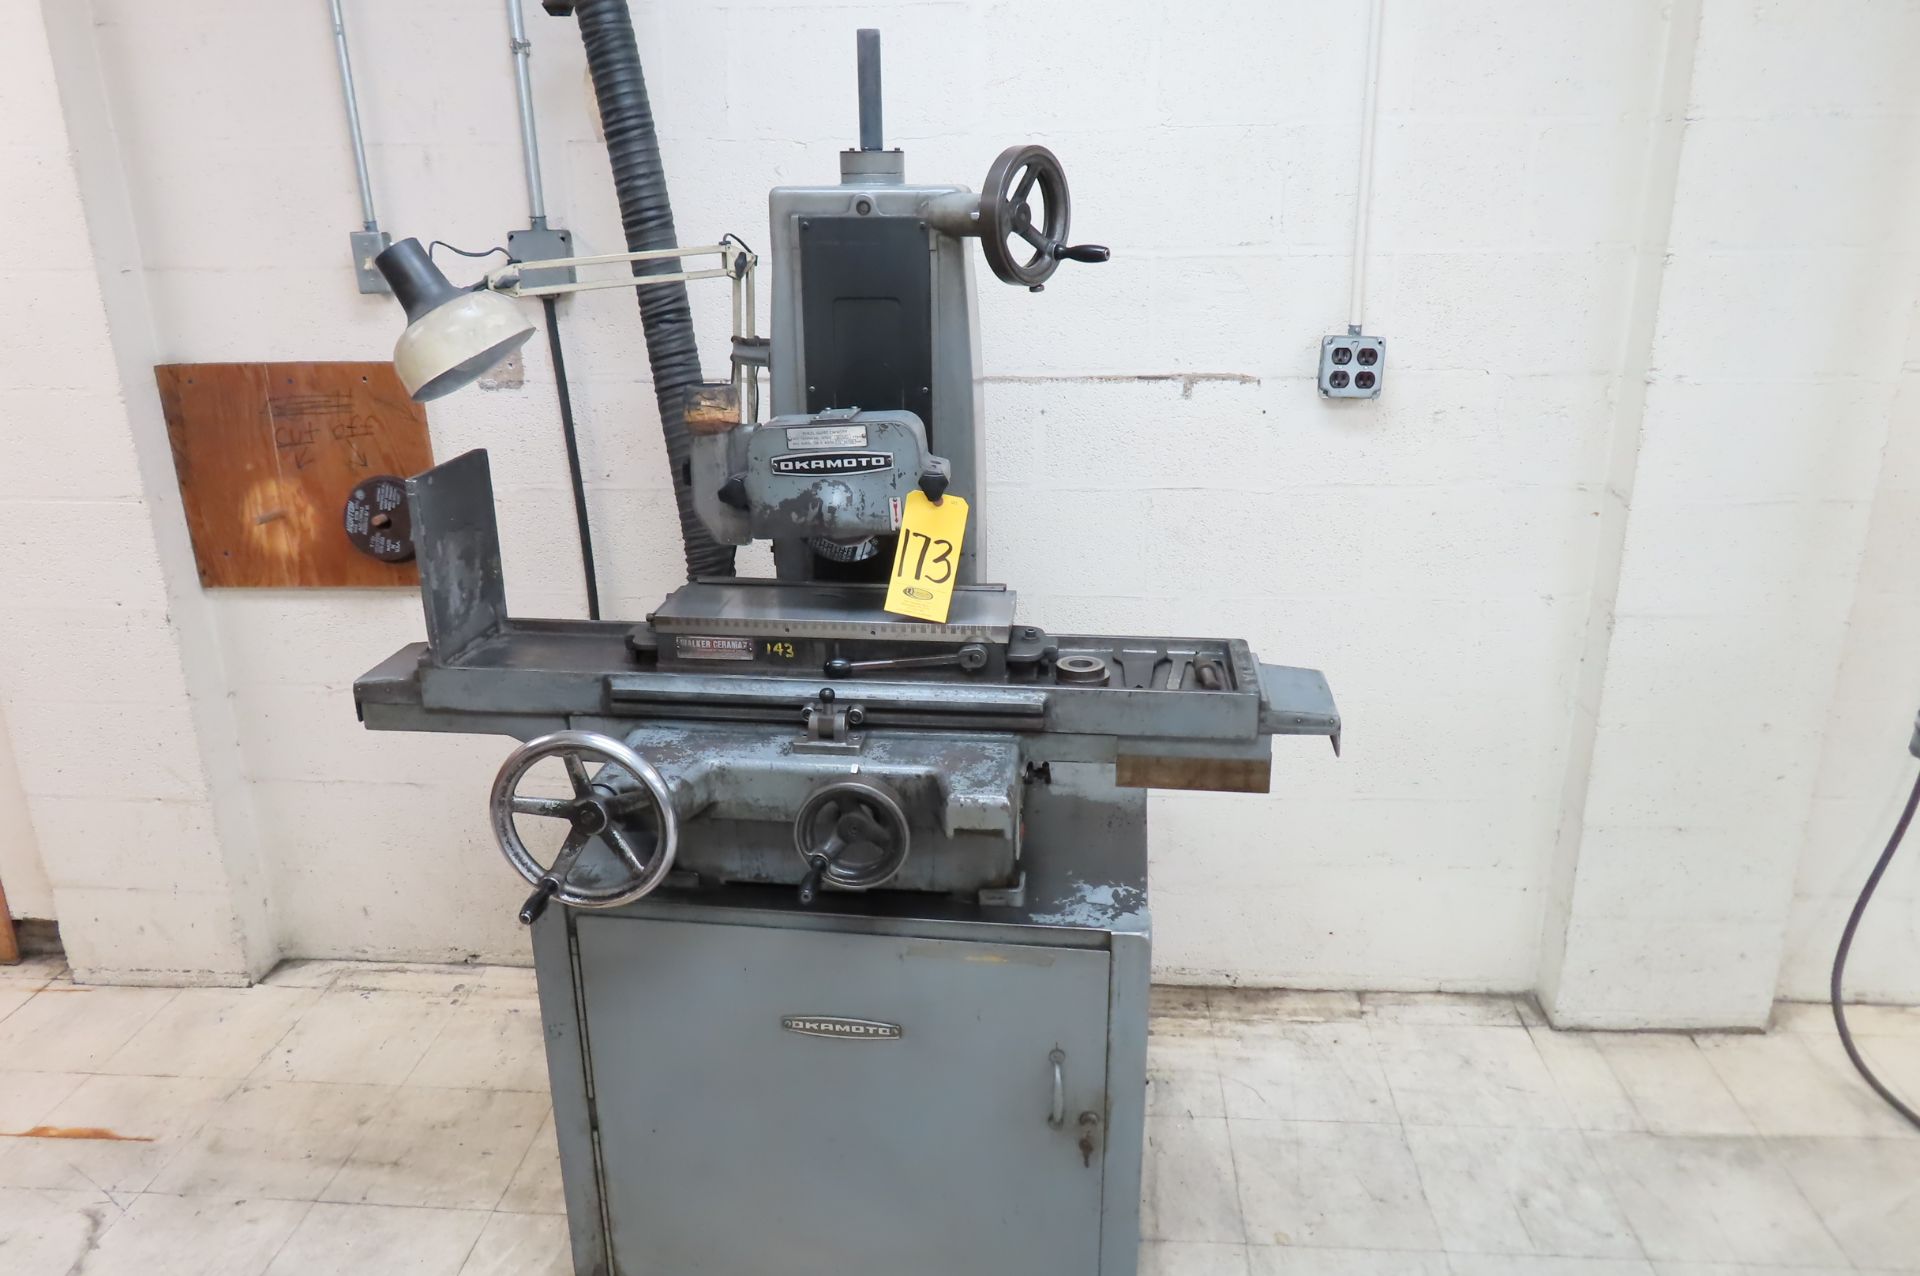 OKAMOTO OMA-450 HANDFEED SURFACE GRINDER, S/N 0A59 WITH 6 X 18. WALKER PERMANENT MAGNETIC CHUCK